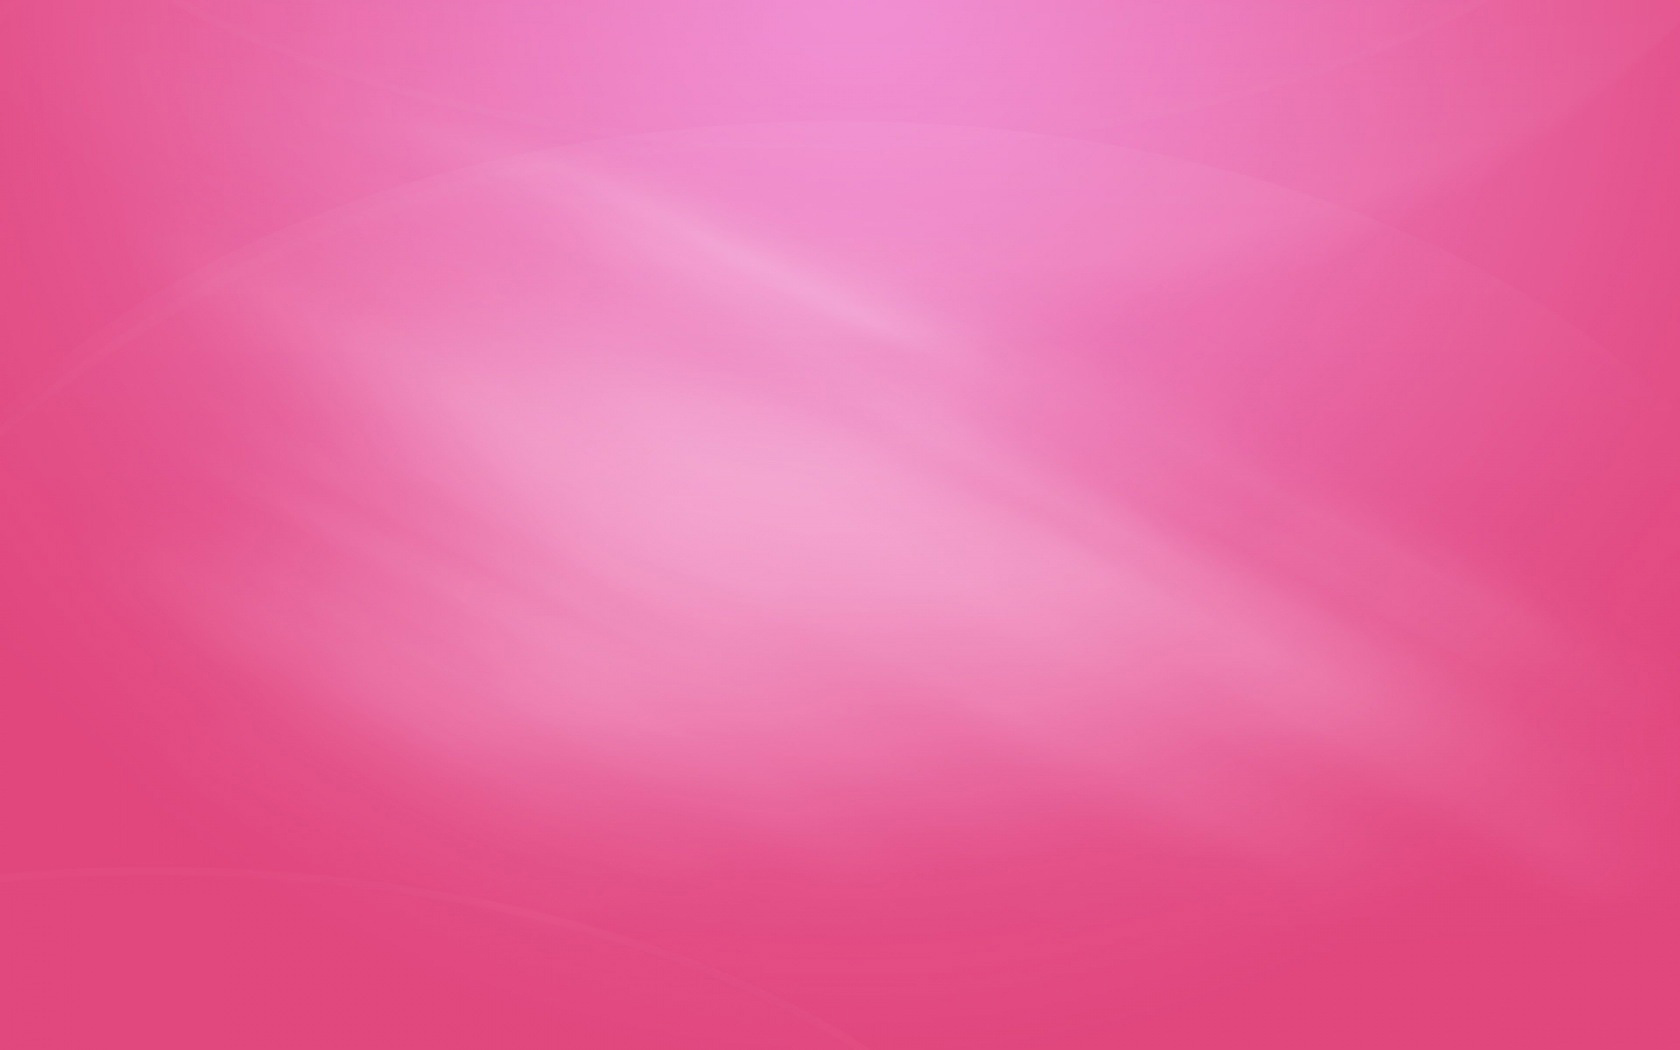 Windows 7 images Pink computer background HD wallpaper and